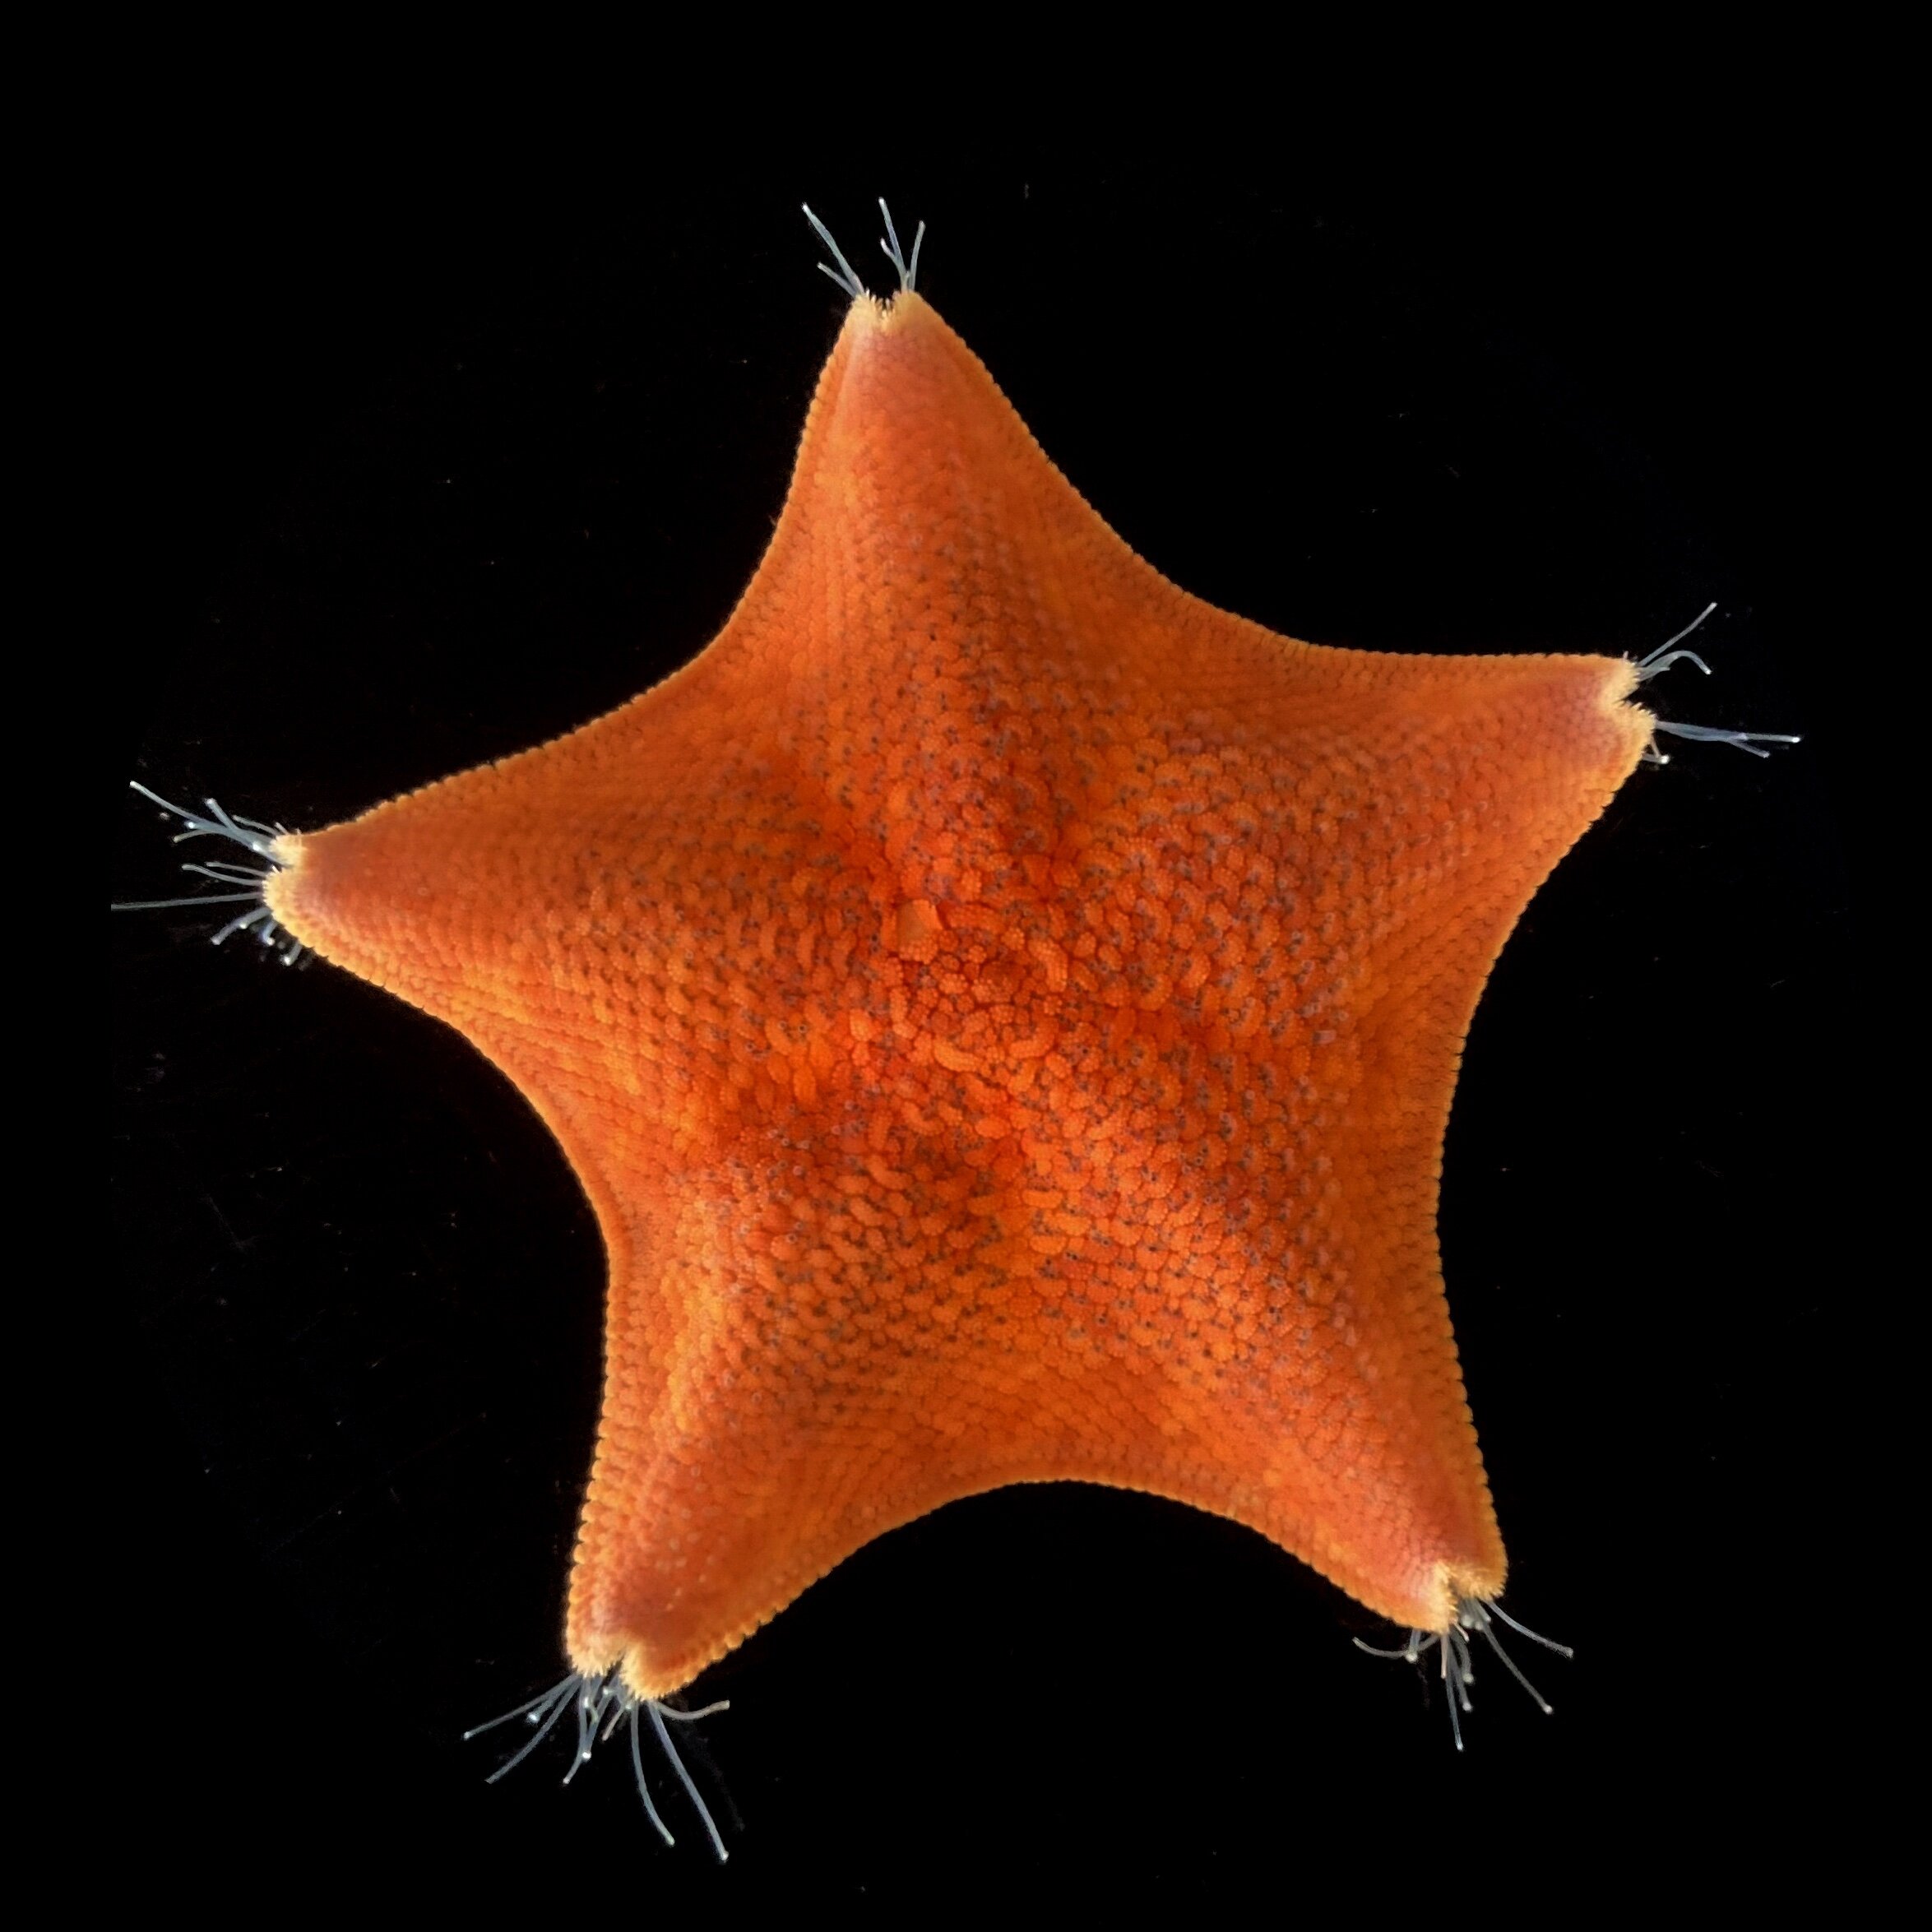 Long presumed to have no heads at all, starfish may be nothing but